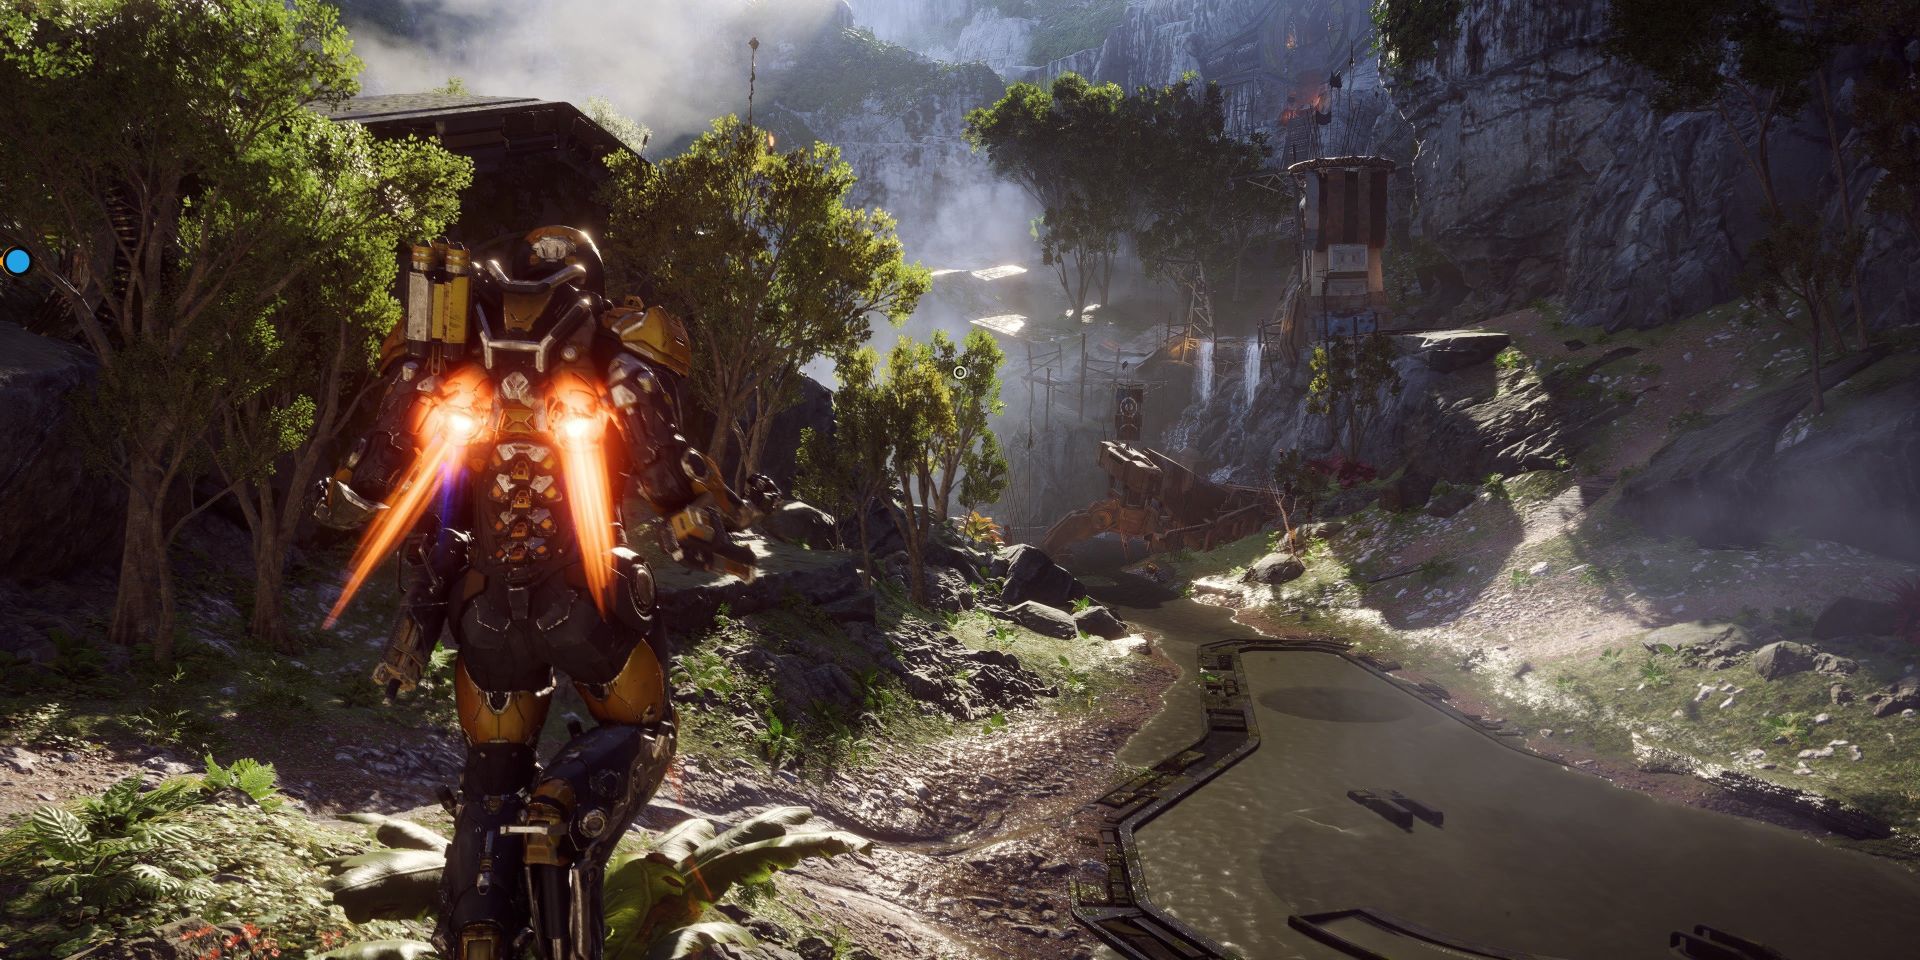 A screenshot from BioWare's Anthem, showing a person in a suit of mechanical armor hovering over the bank of a small river surrounded by forest.